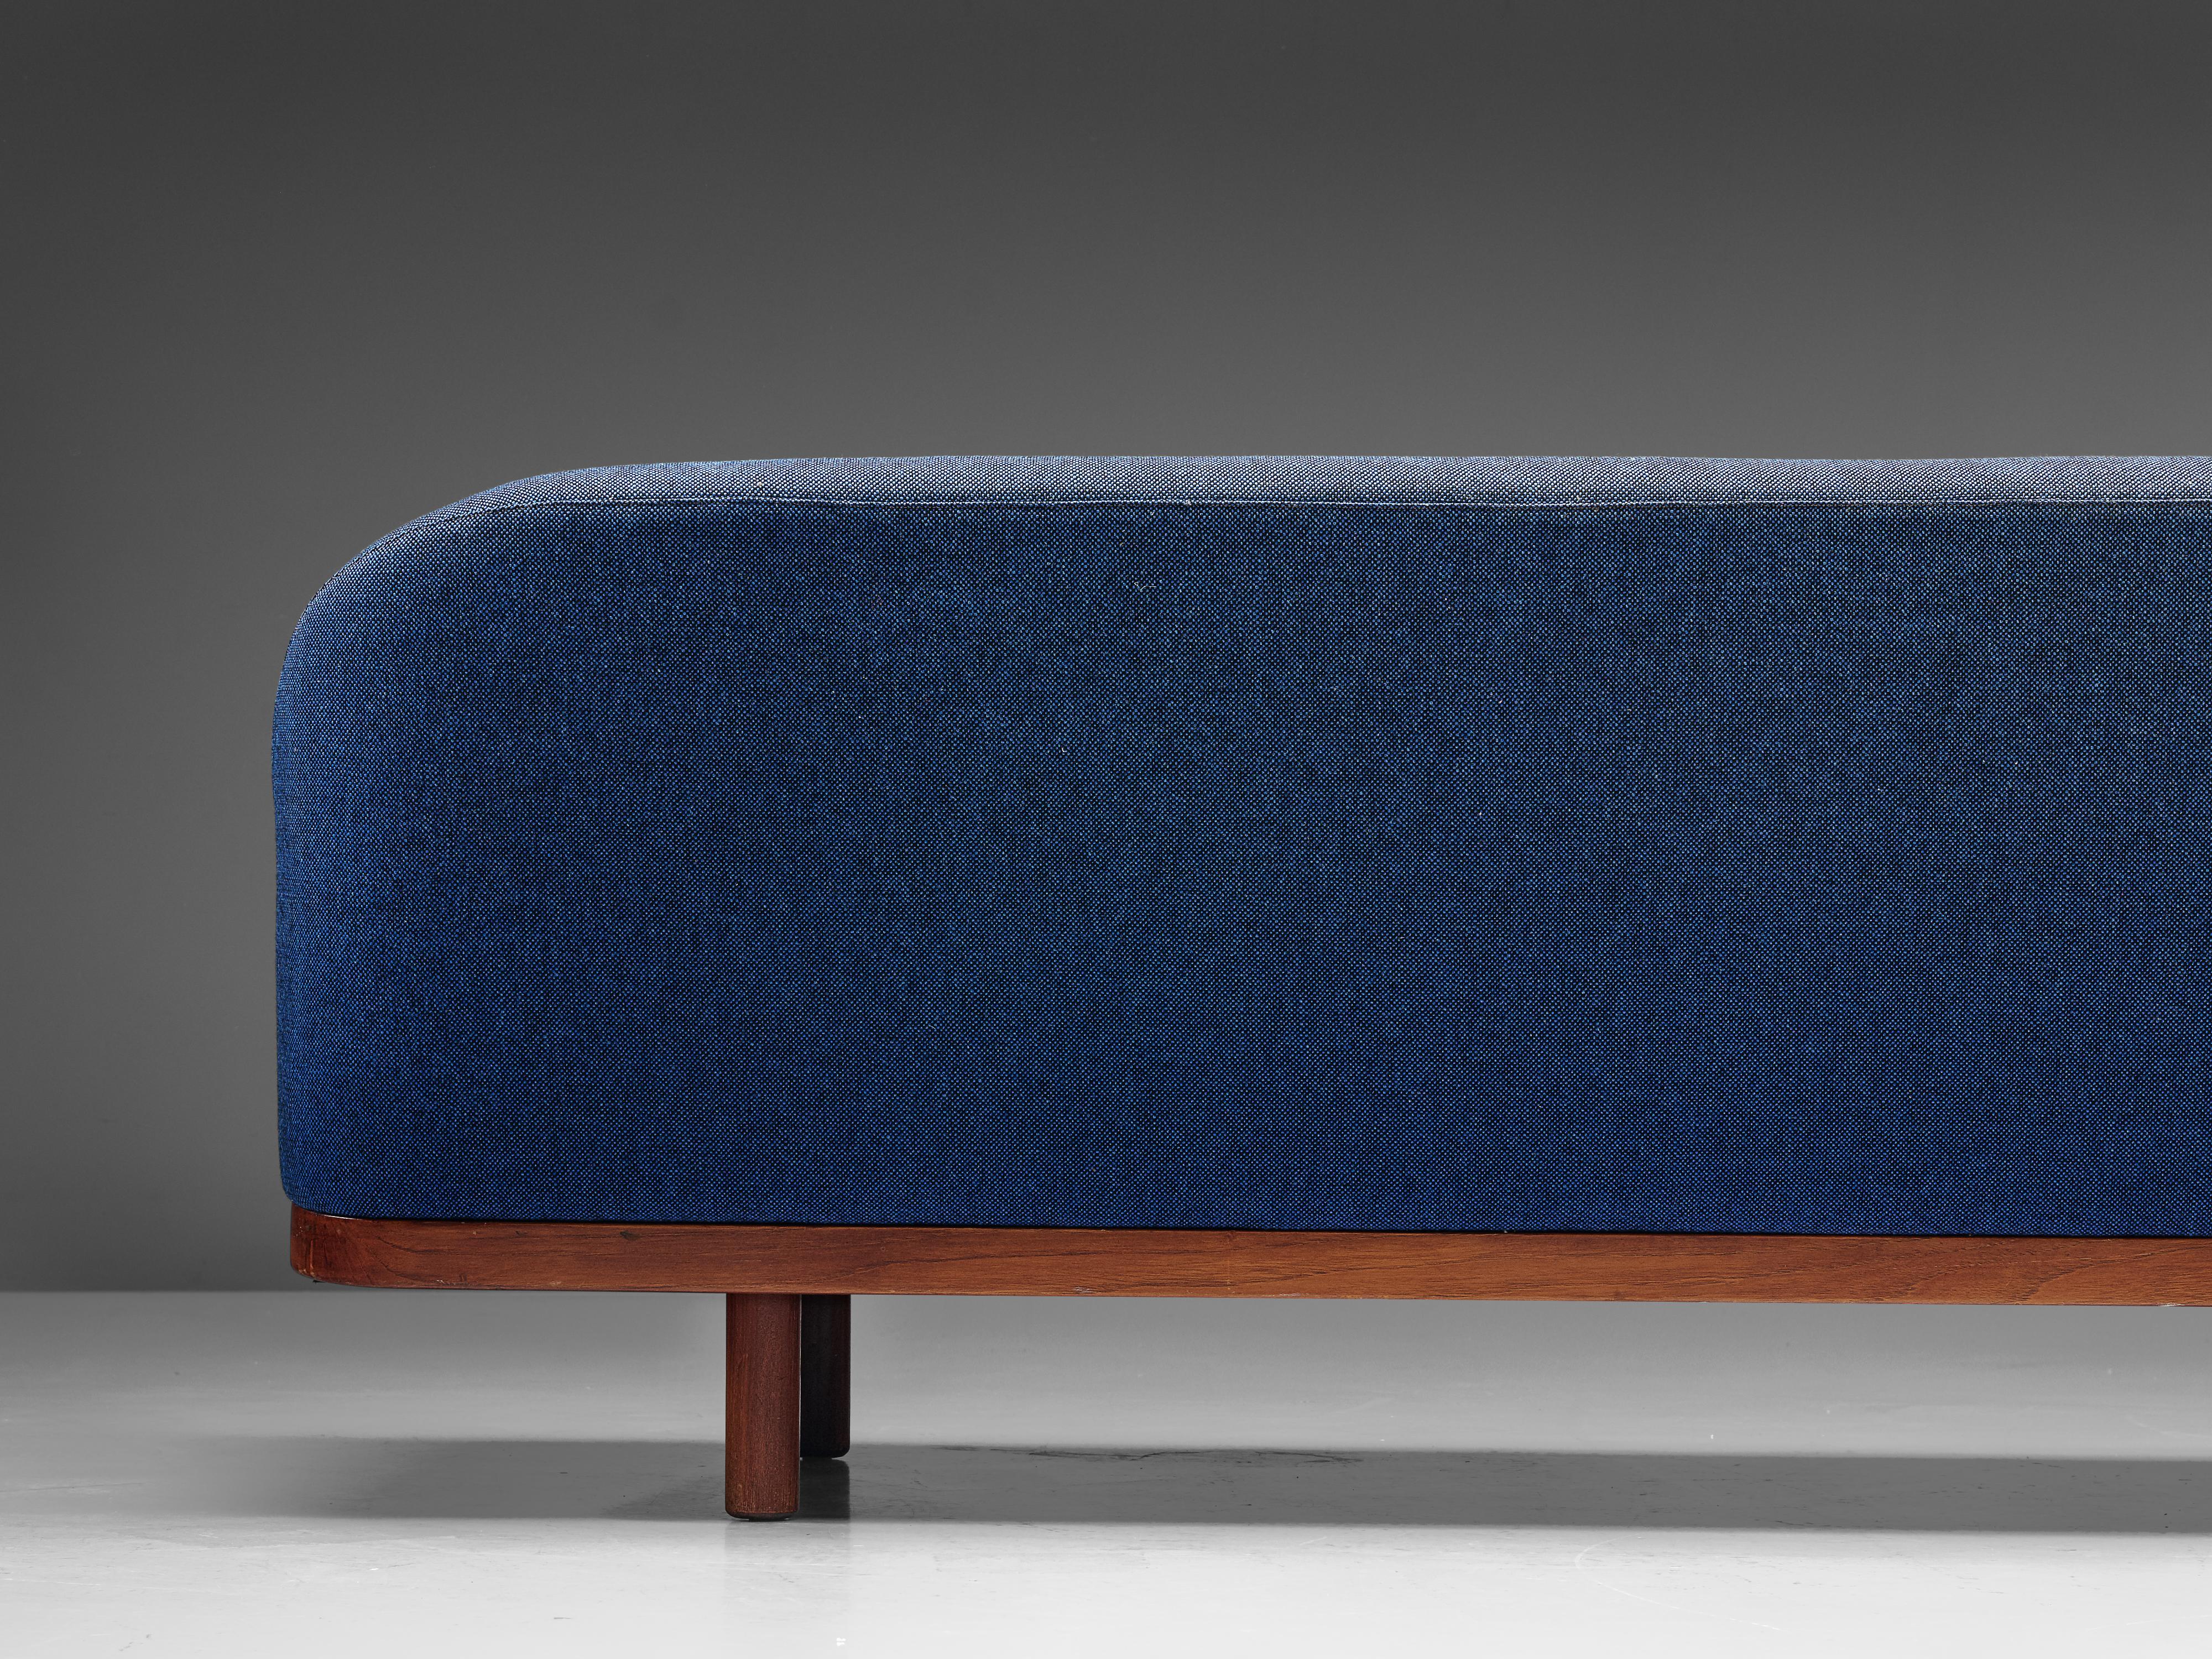 Arne Halvorsen, sofa model 2010, teak, blue upholstery, Norway, 1960s

Two large sofas designed by Norwegian designer Arne Halvorsen. The sofas are characterized by their tuffed back in combination with the rounded armrests. The horizontal line of